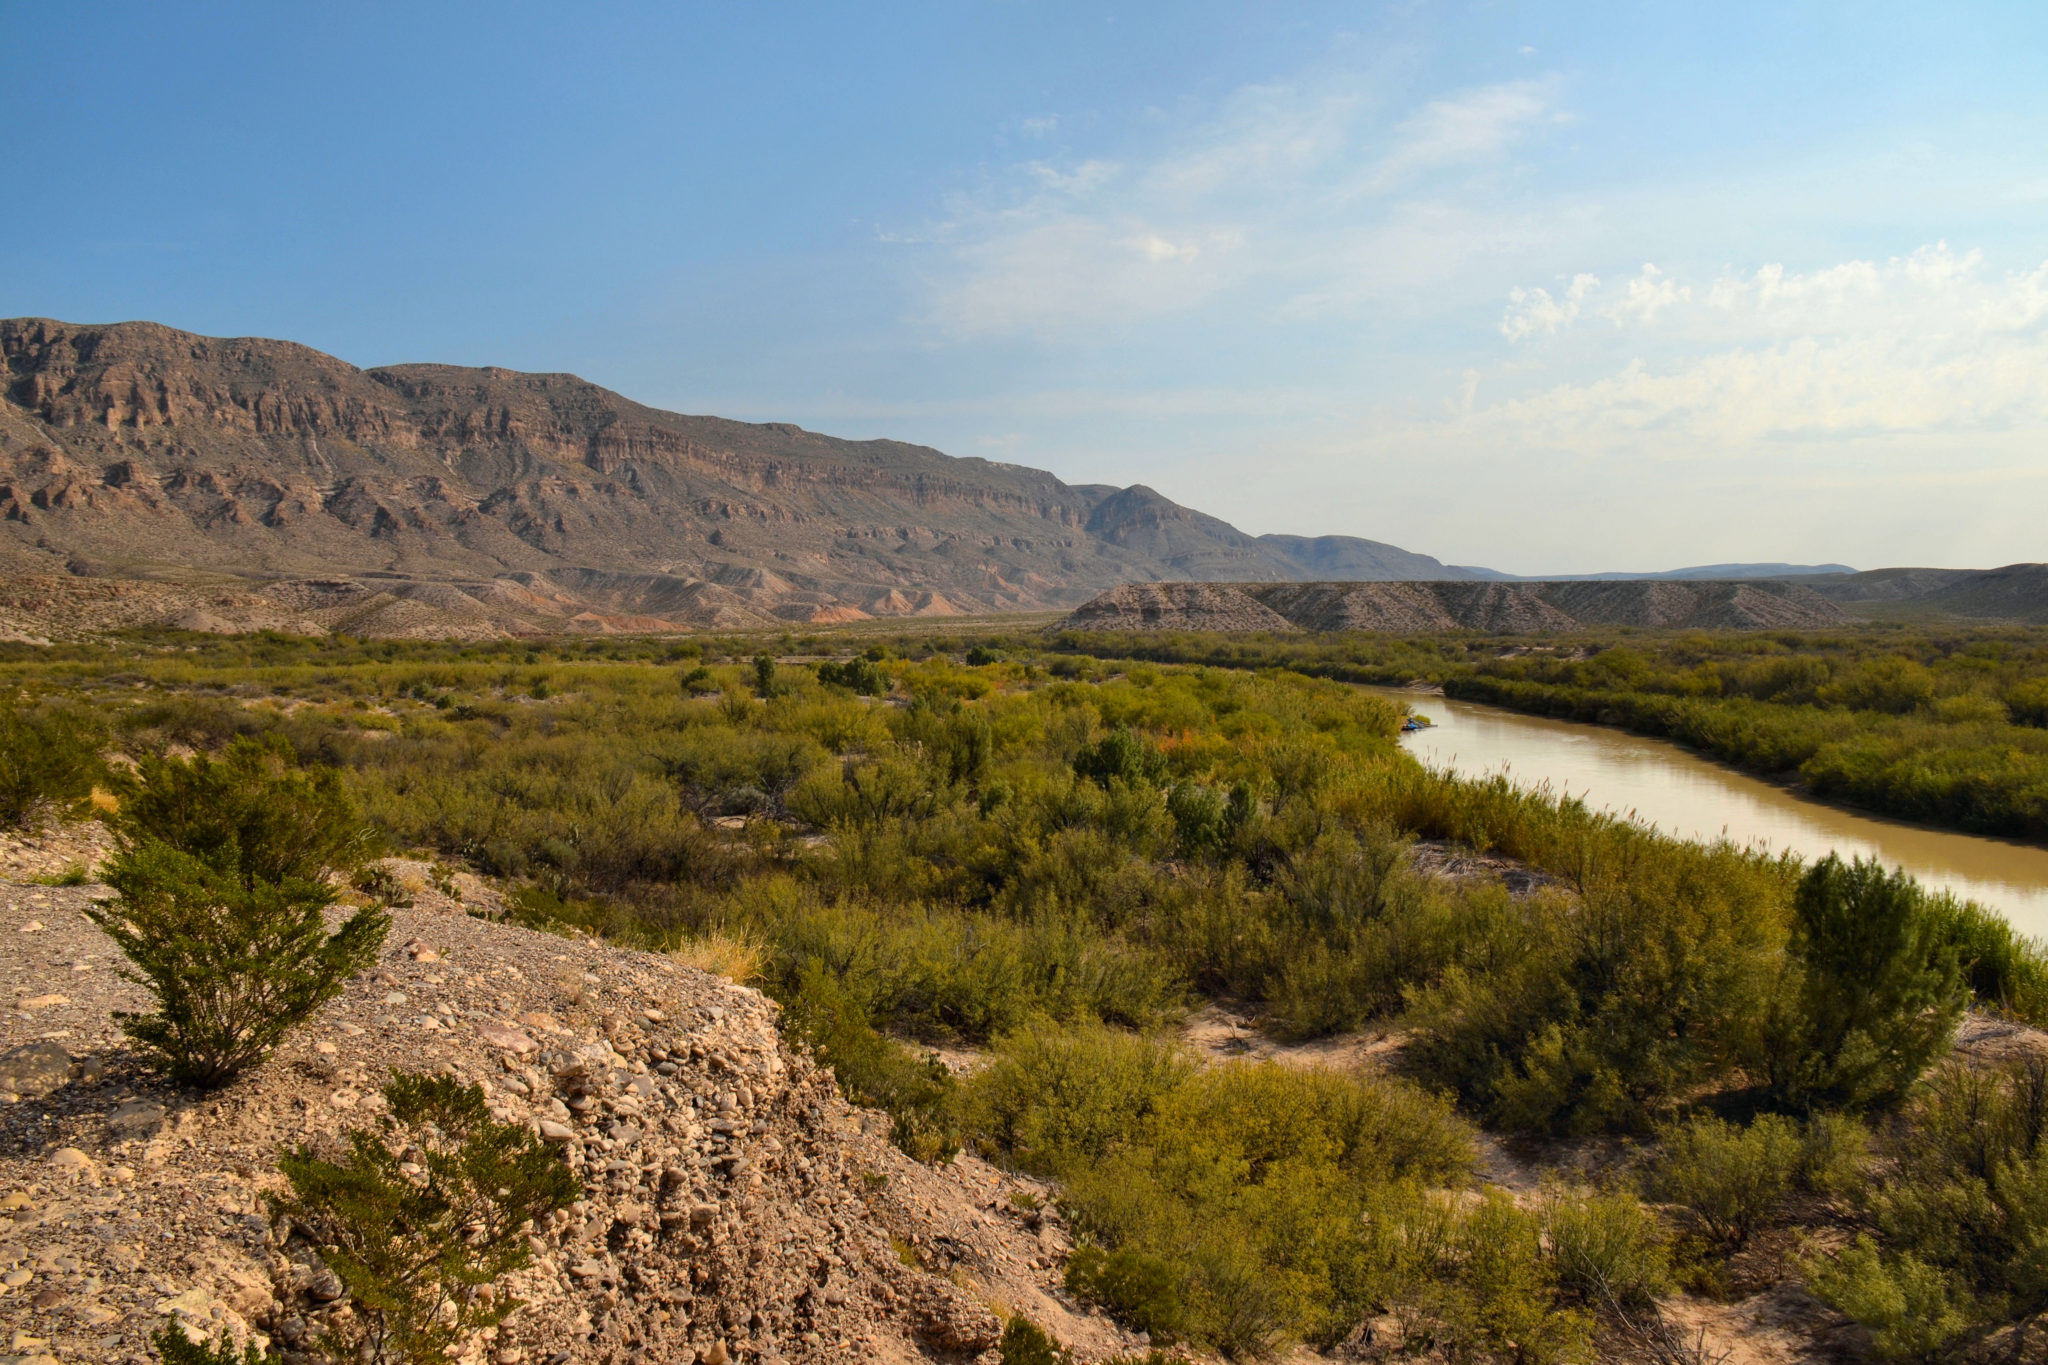 View from Boquillas Canyon Overlook